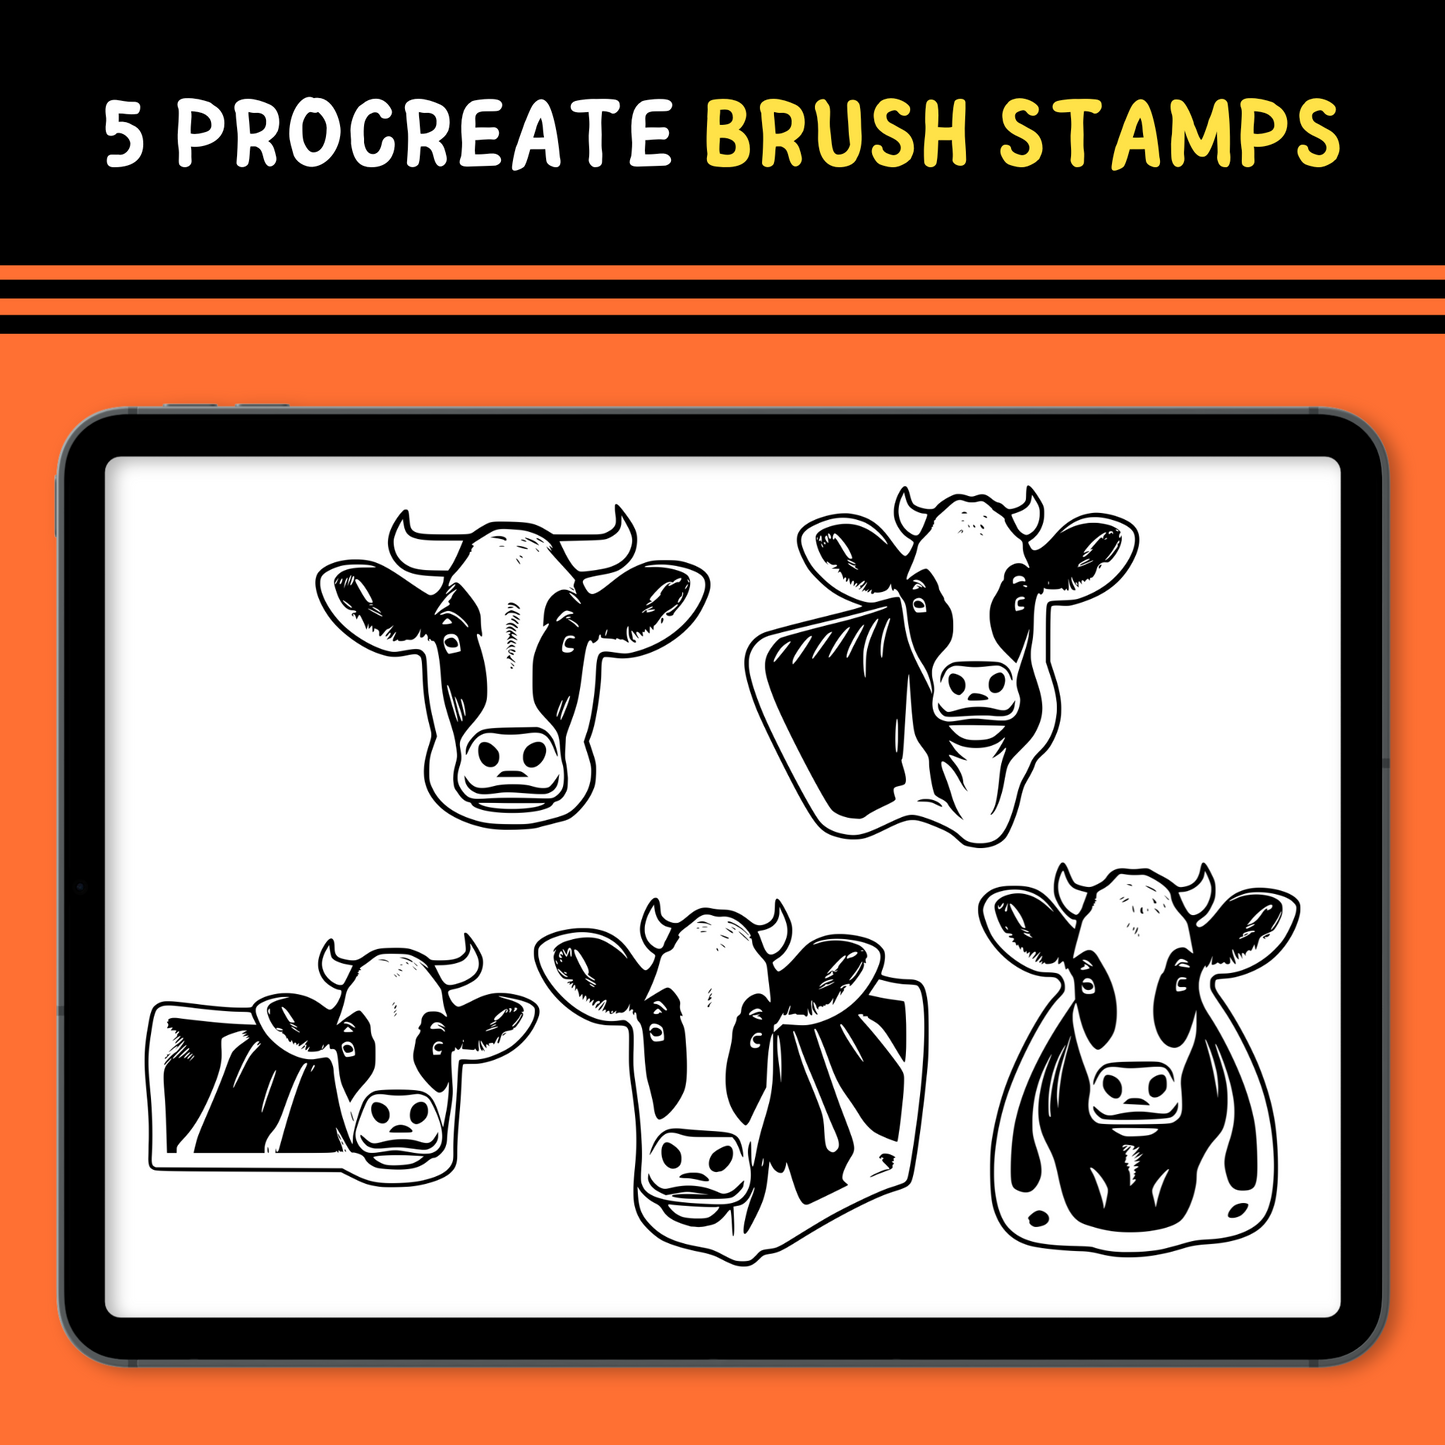 Cow Procreate Brush Stamp Bundle, Cow Brush Stamps, Cow Procreate Stamps